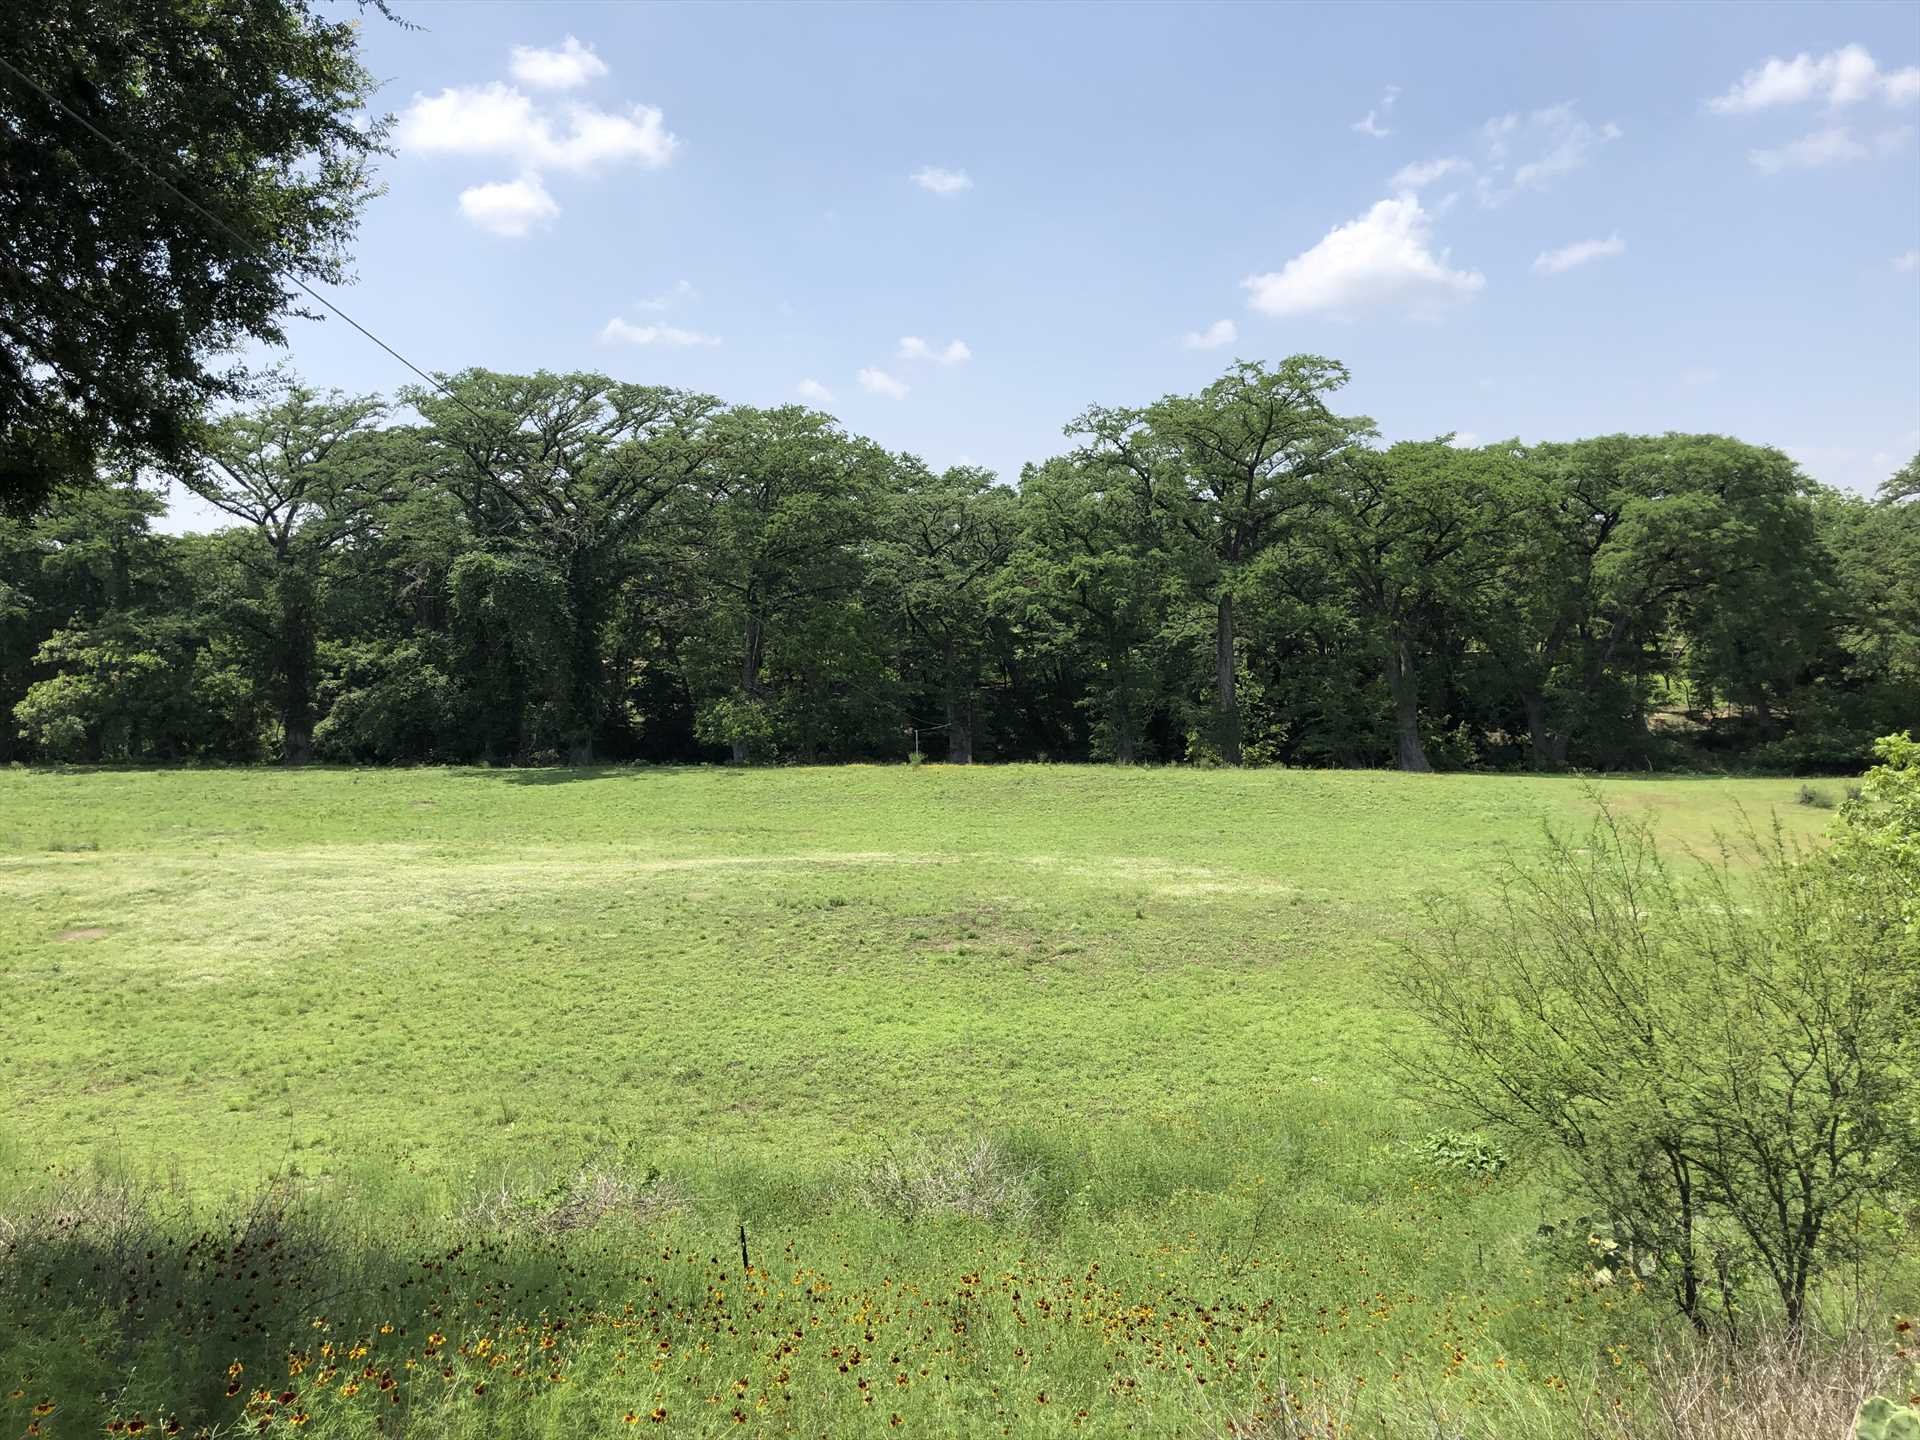                                                 Here's the meadow between the cabin and the Medina. It's also a great open space for kids to play and explore! The property also includes a fire pit and charcoal grill for snacks and BBQ feasts.